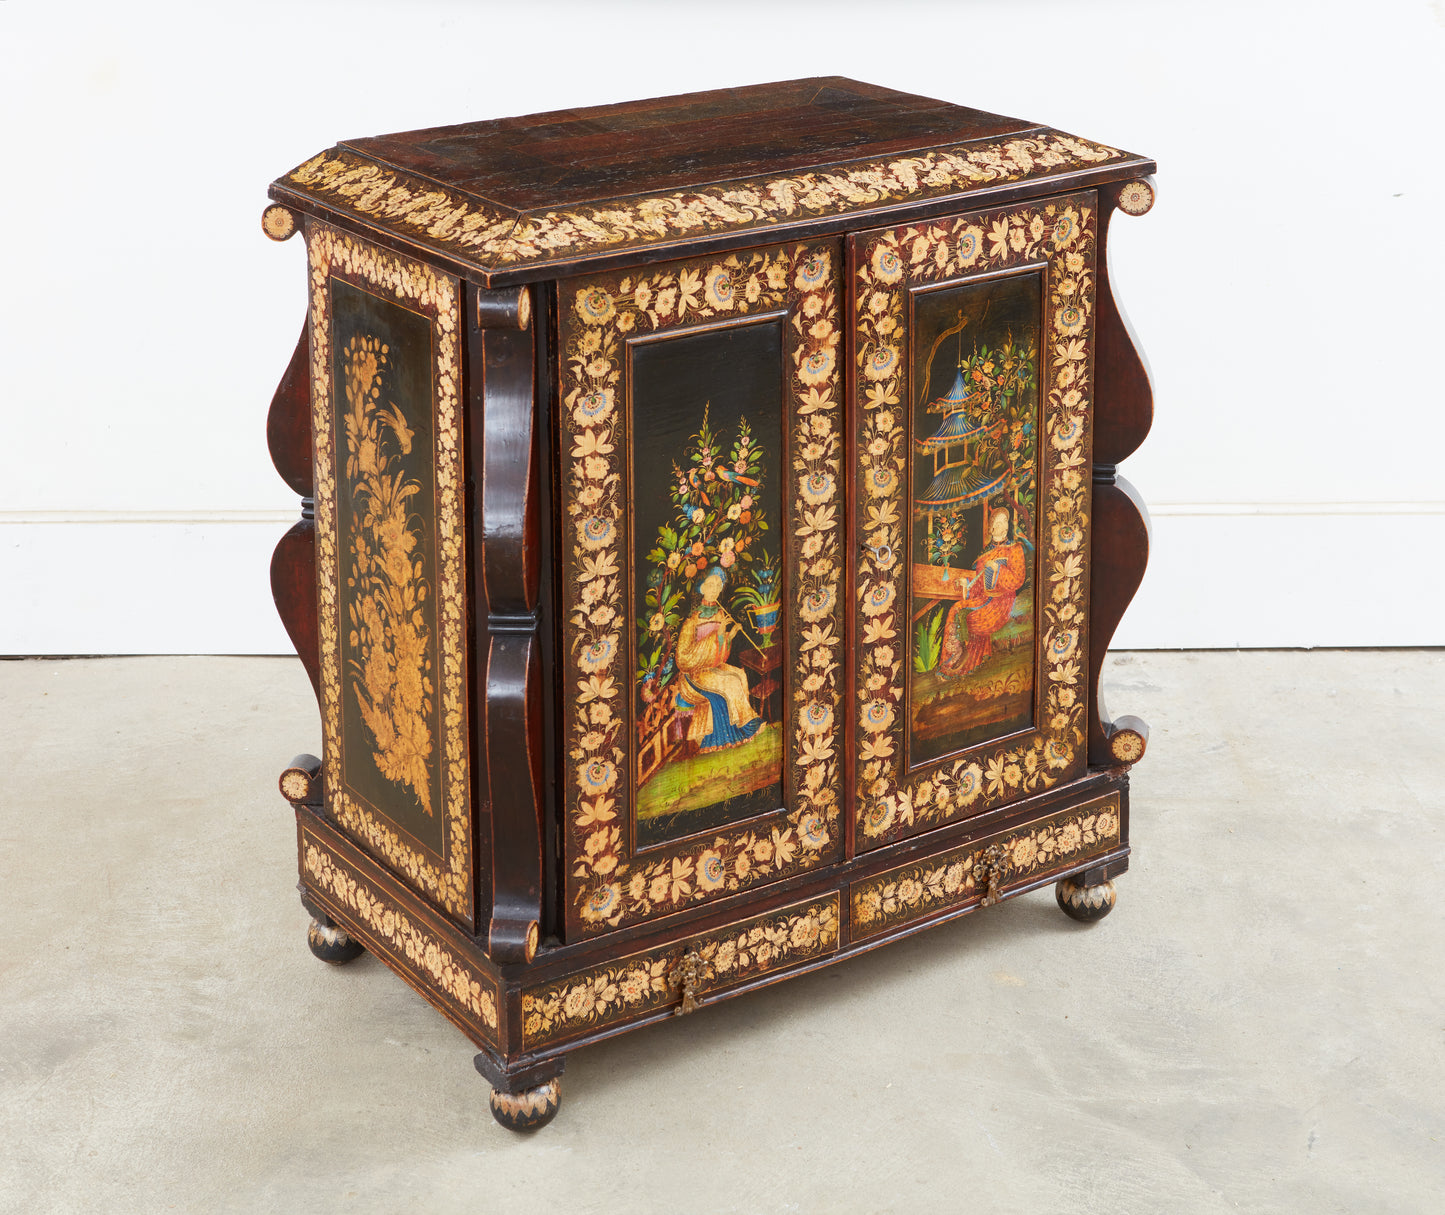 A VERY FINE REGENCY PARCEL GILT AND POLYCHROME JAPANNED AND PENWORK CABINET c. 1820